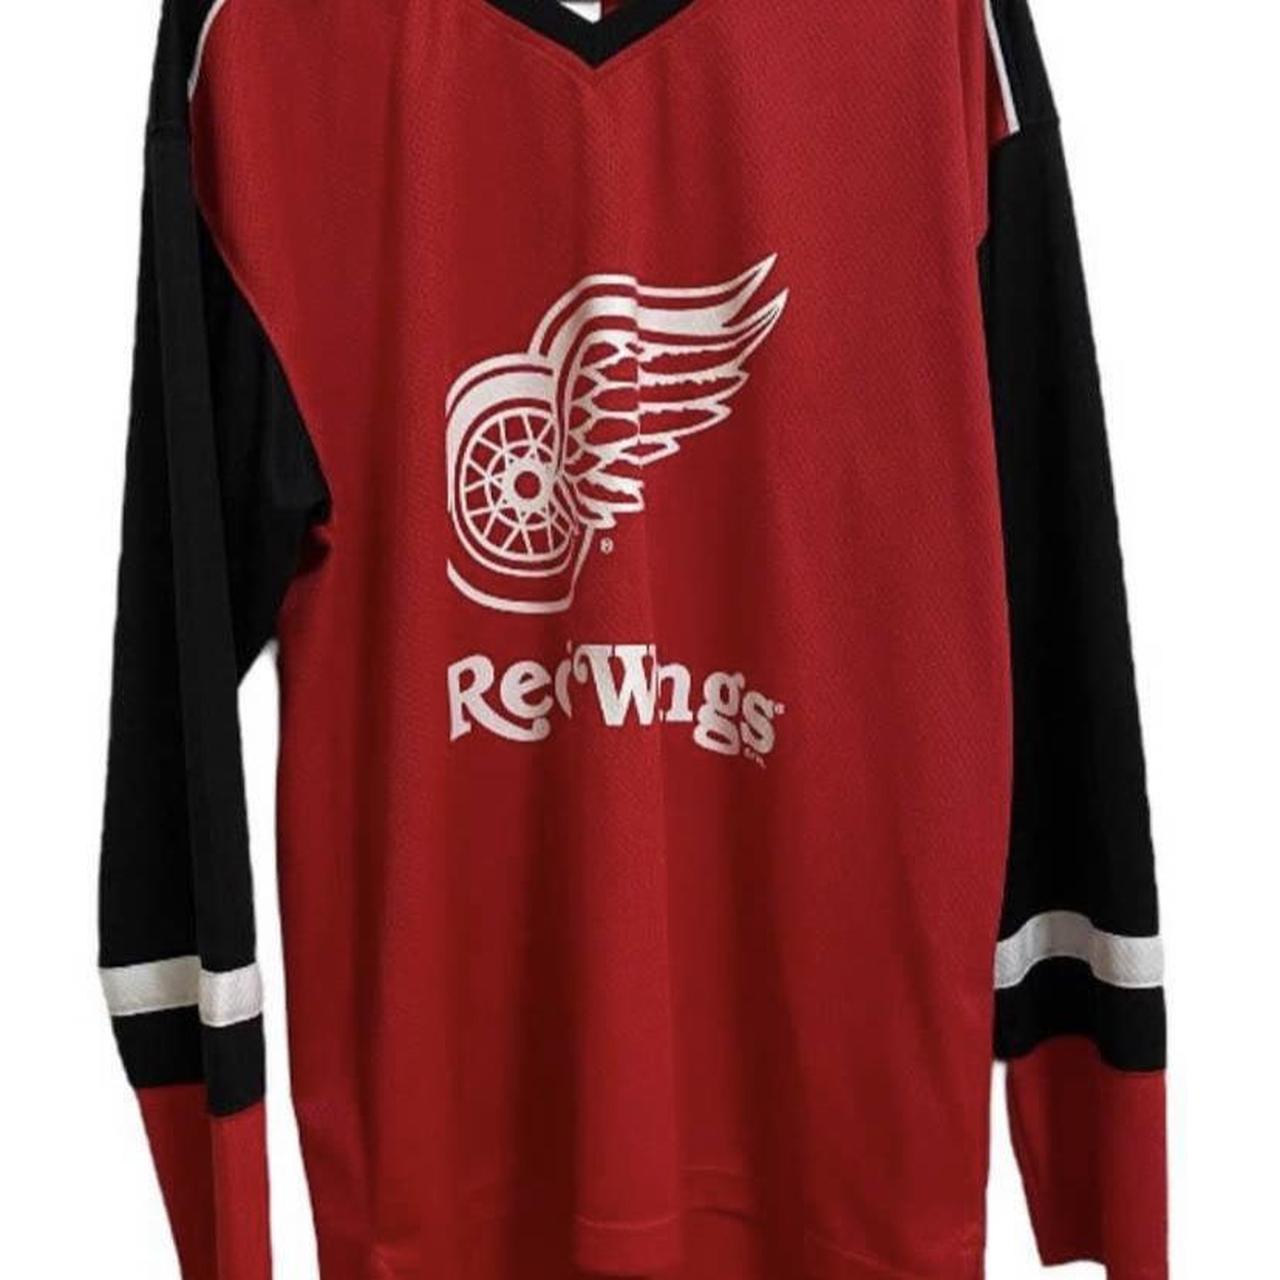 Red Wings Jersey Size L Red Black Hockey NHL Mens - Depop